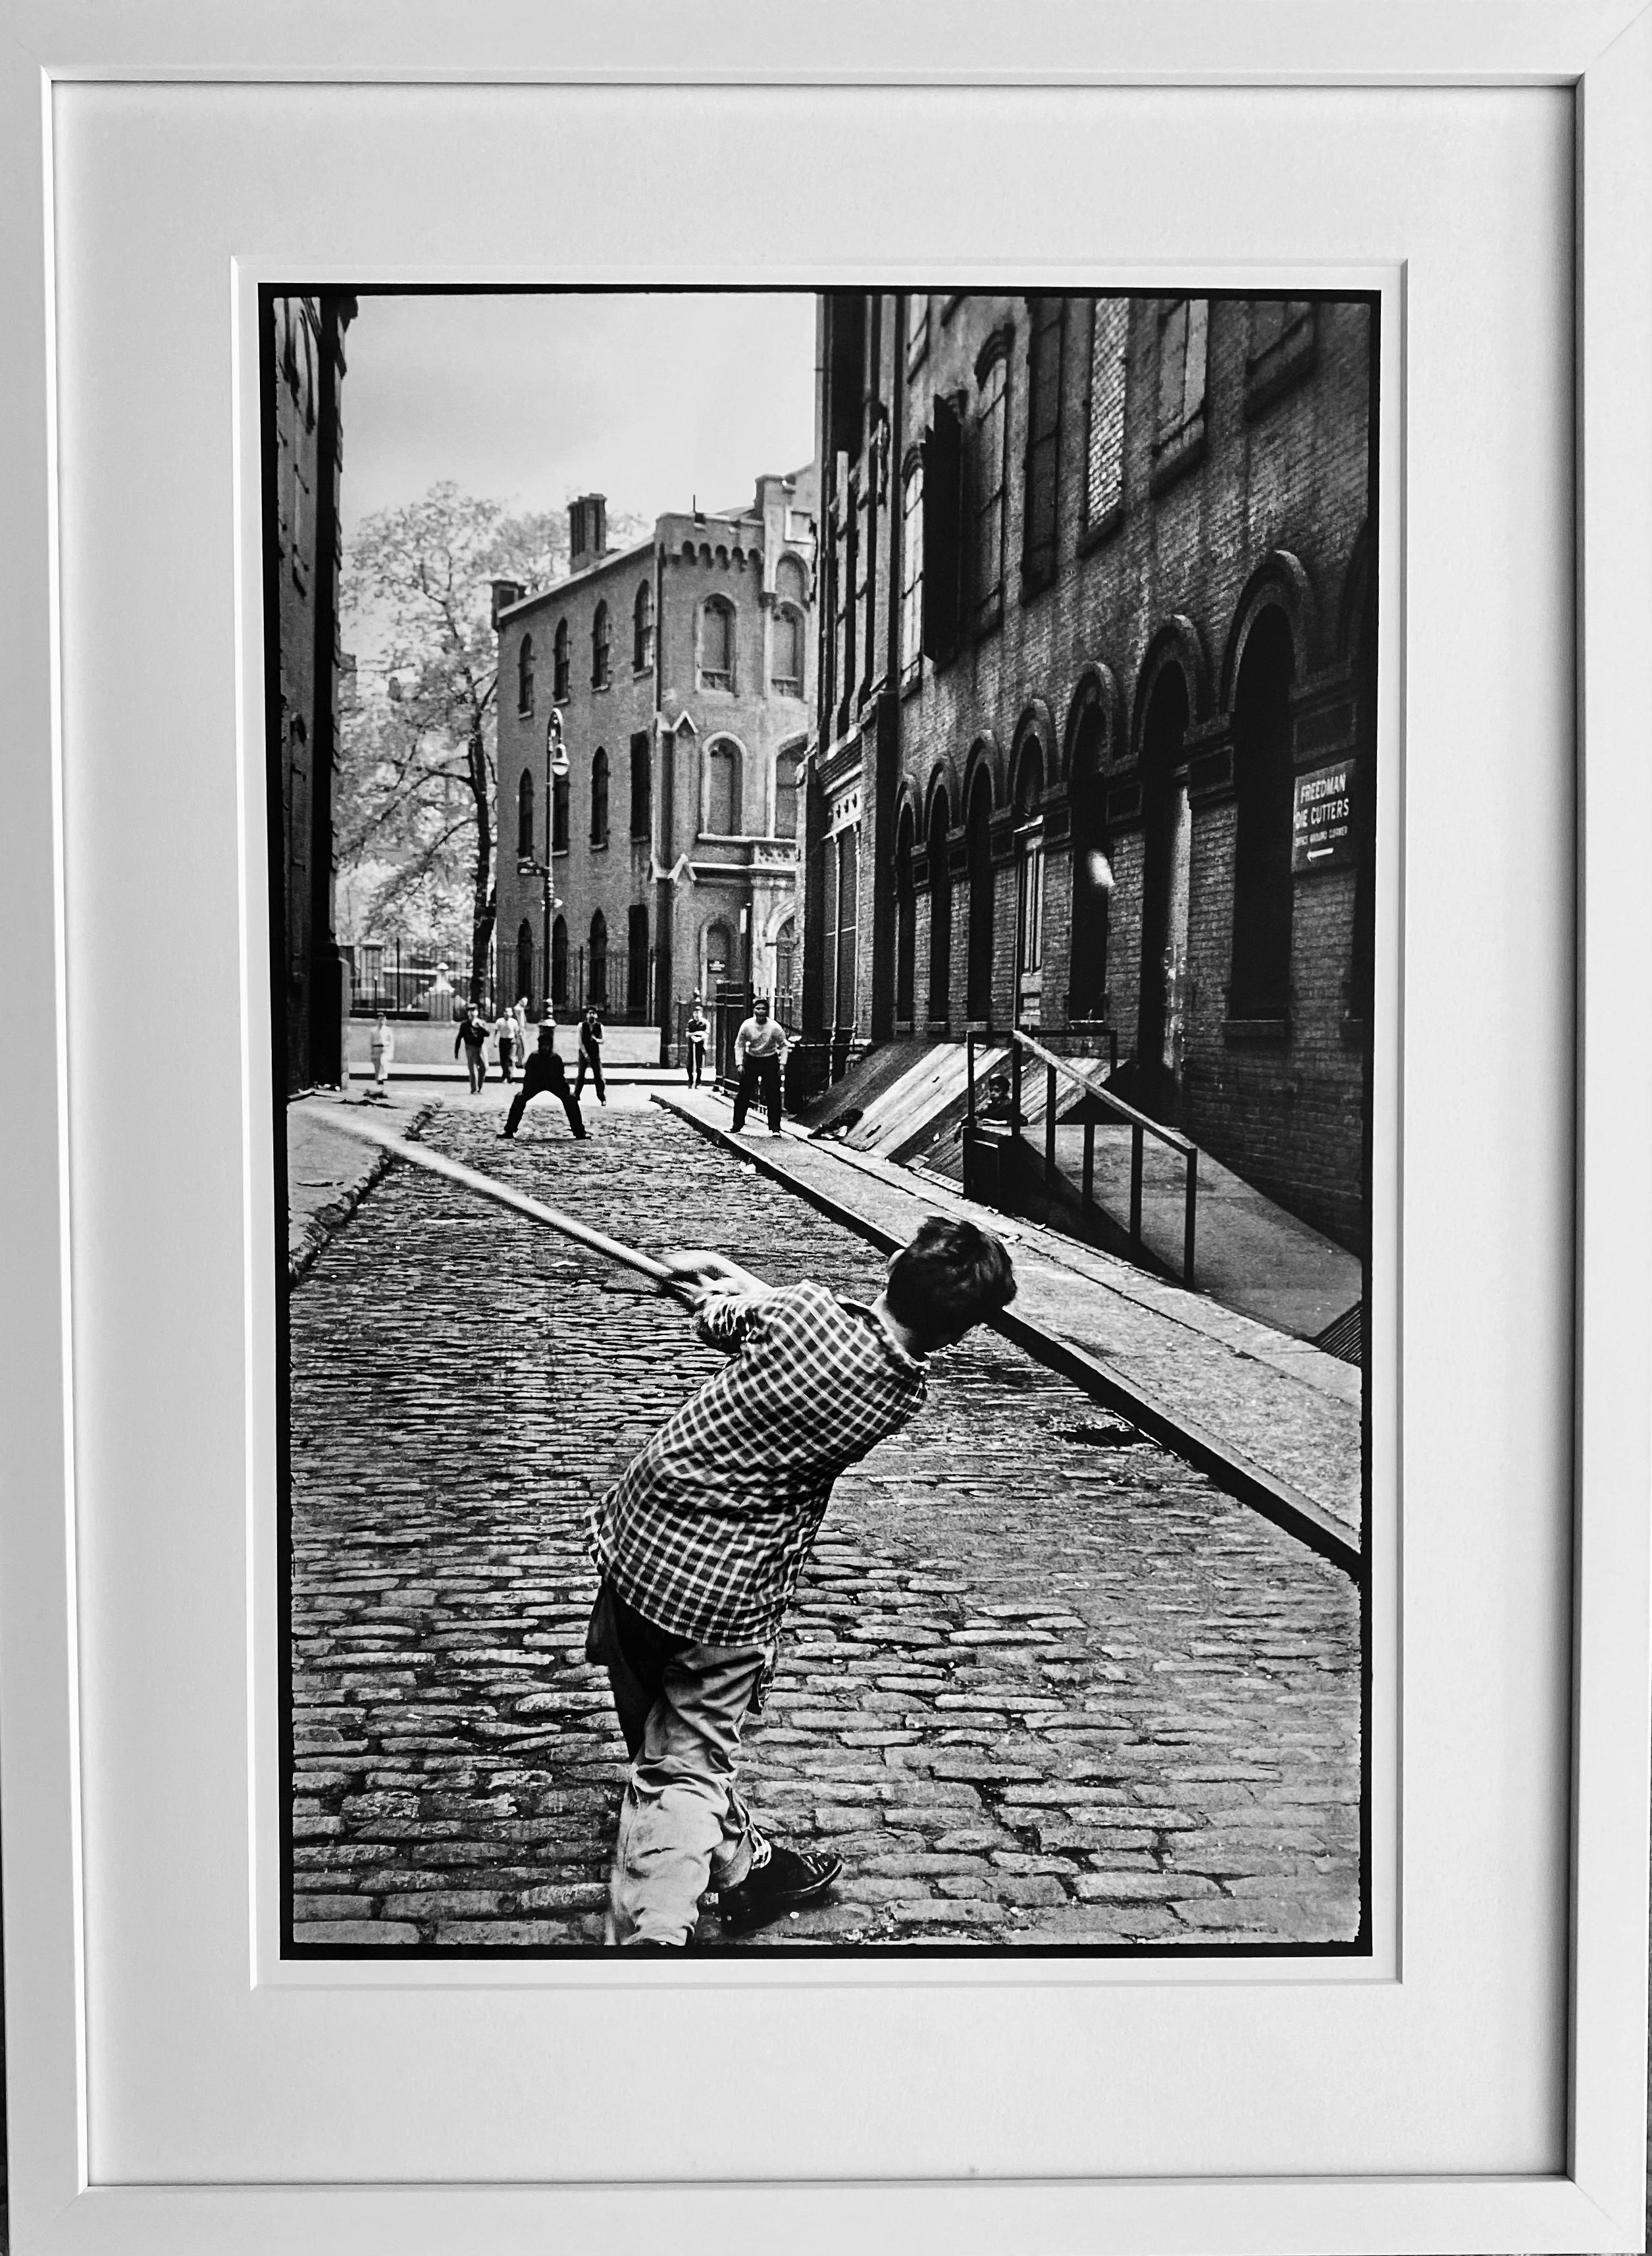 Stickball, Little Italy, NYC, Black and White Limited Edition Photograph im Angebot 1